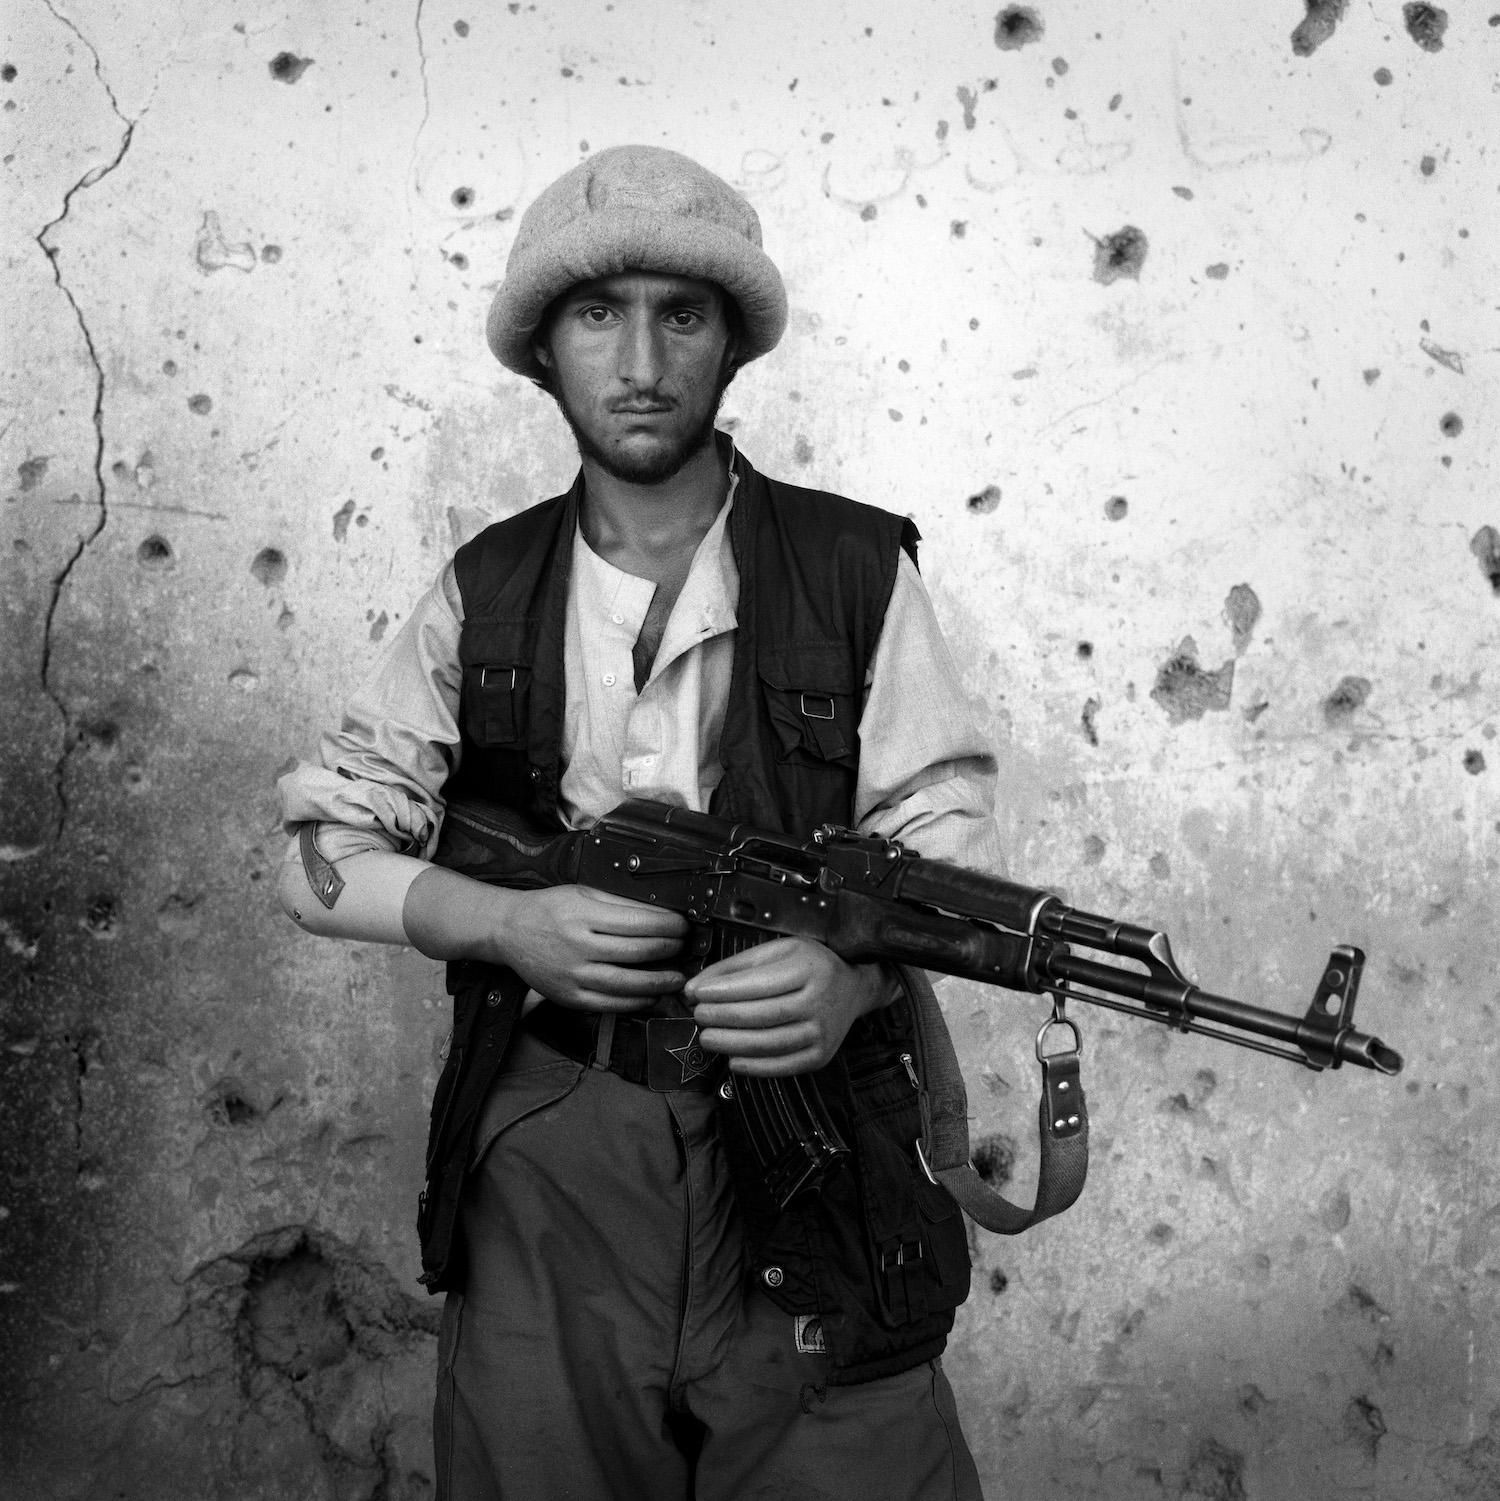 Stephen Dupont on documenting Afghanistan’s “Forever War” | 1854 Photography